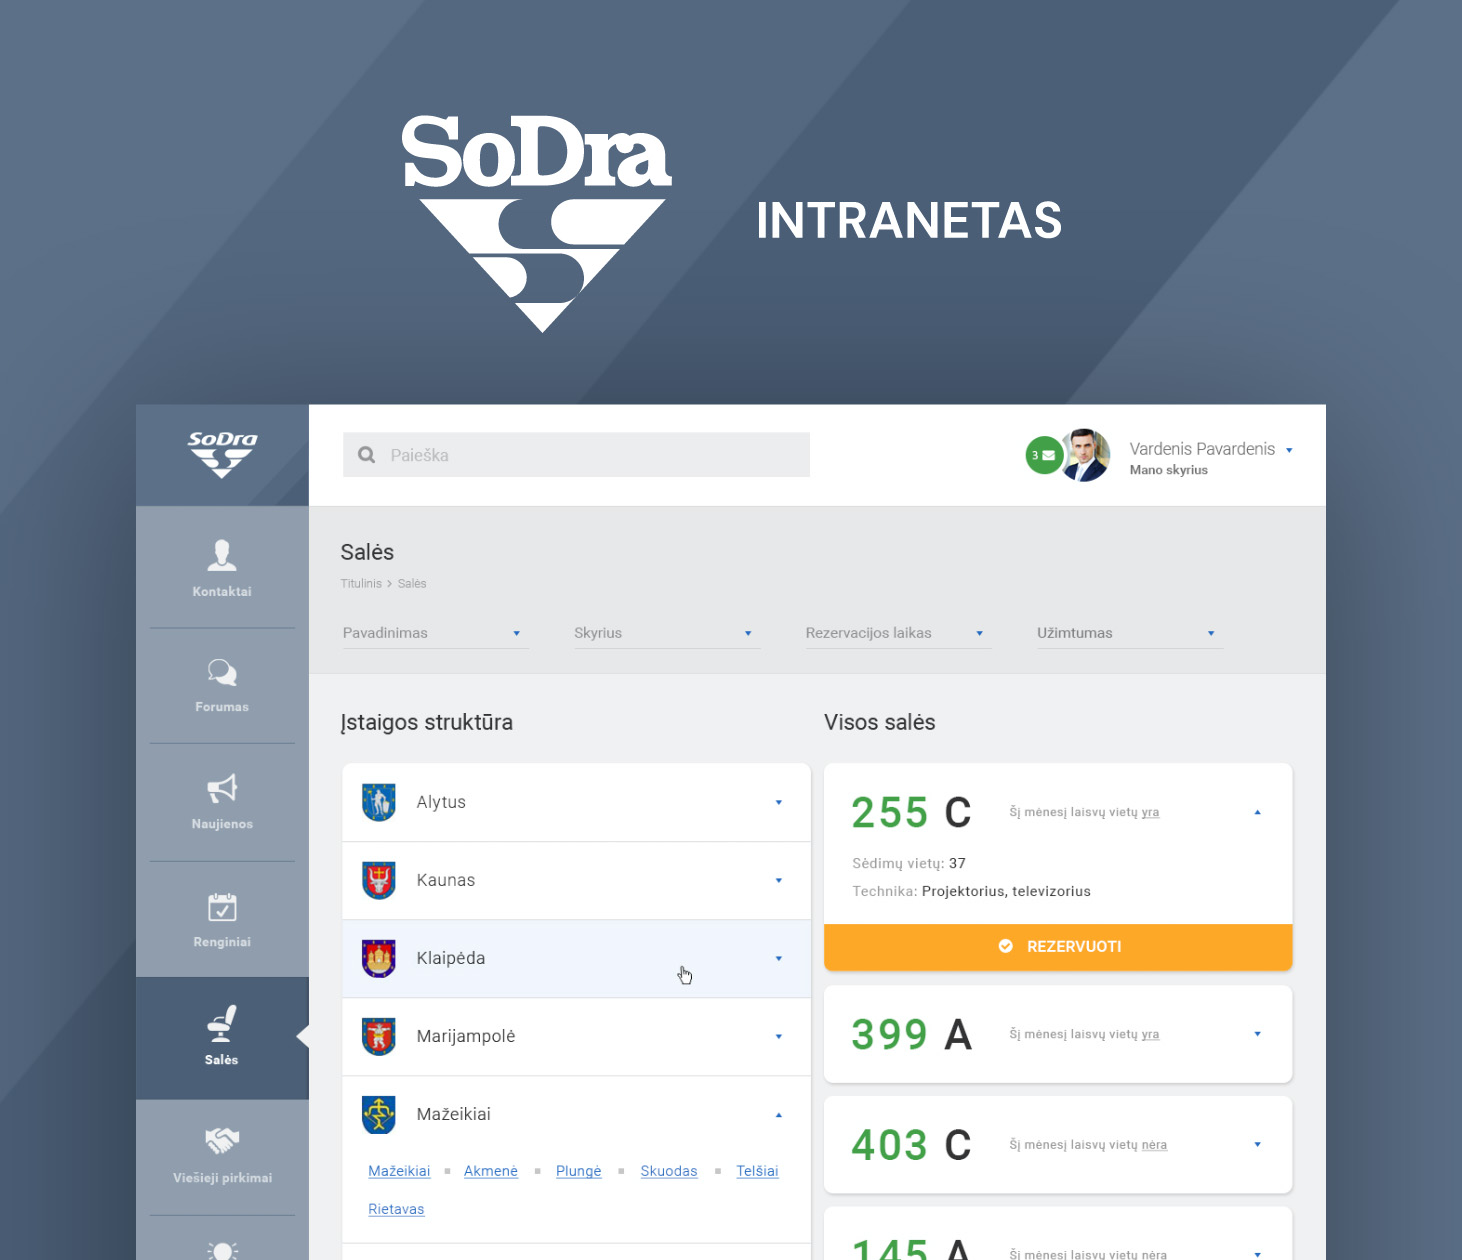 The intranet system of SODRA administrative institutions